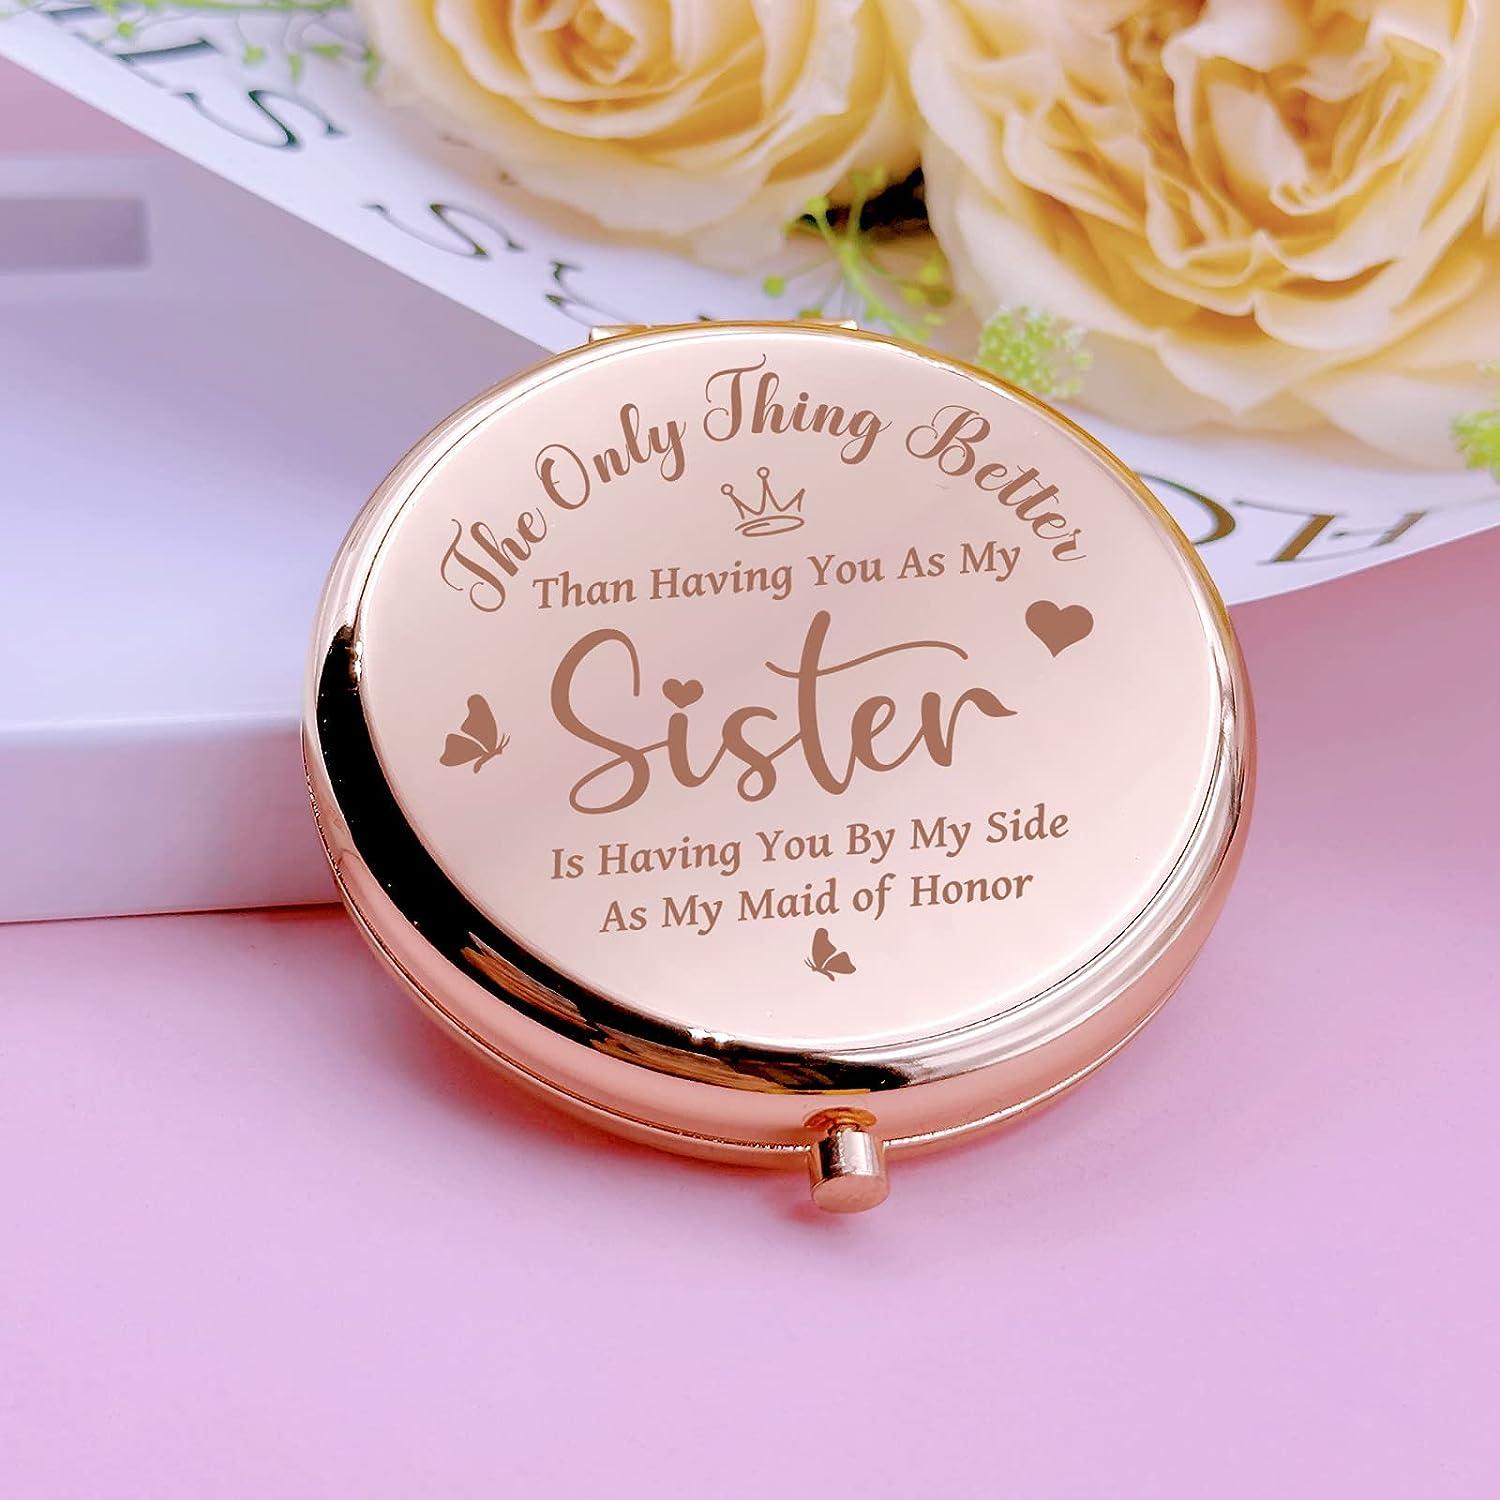 10 Gifts for Your Newly Engaged BFF